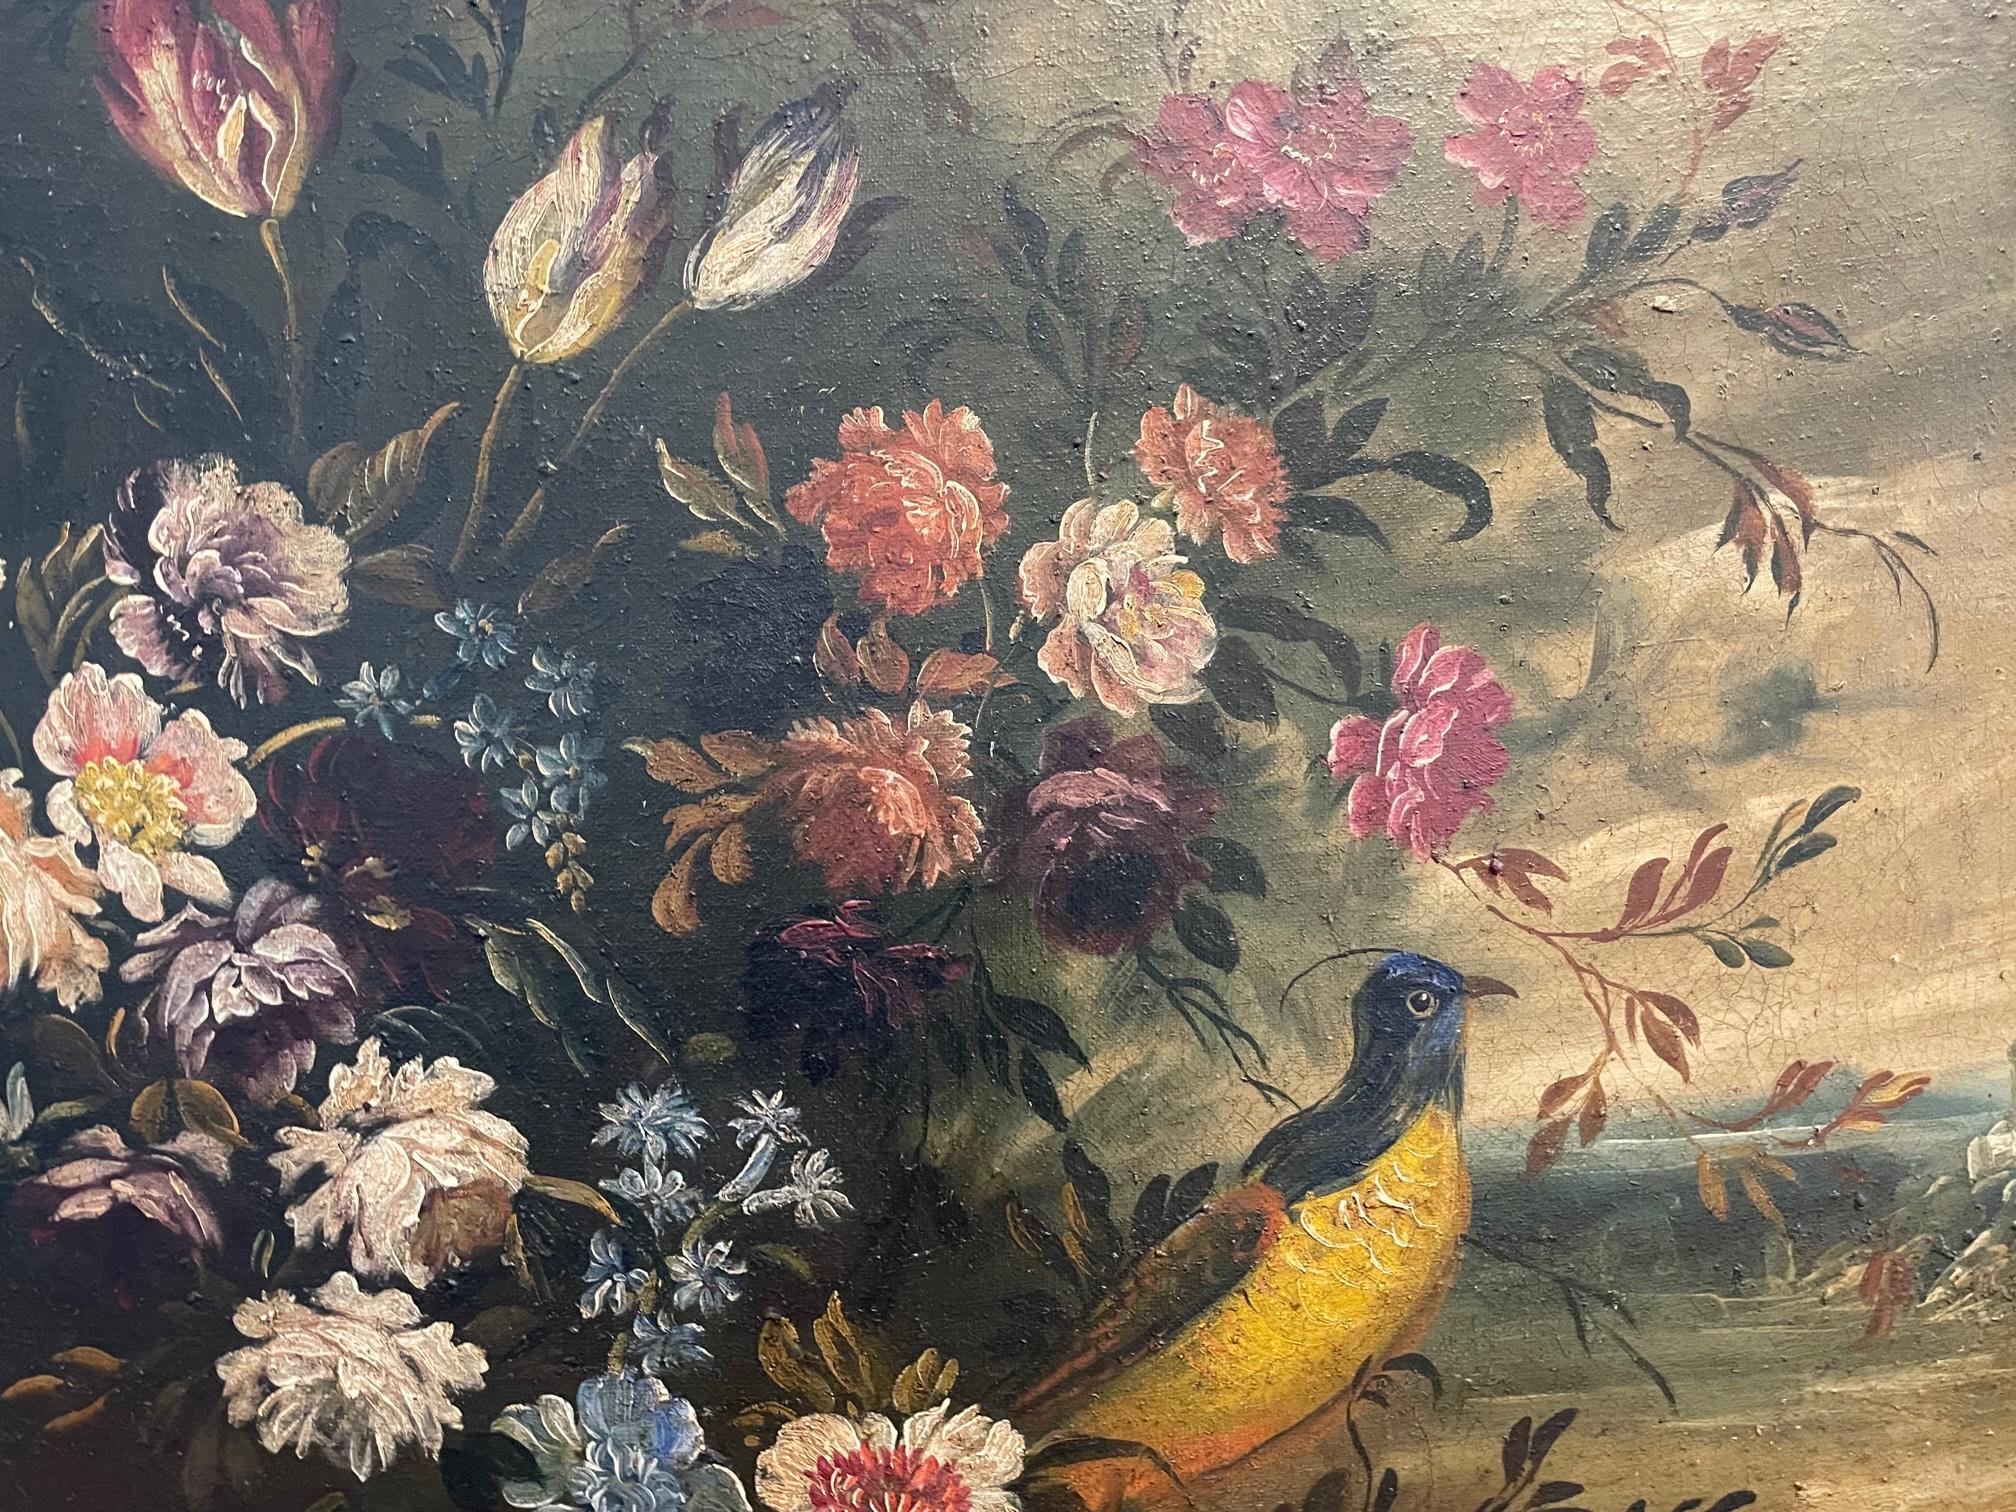 17th century oil pigment painting on canvas likely Italian or Flemish/Dutch Baroque style with water/landscape view to right of blue and golden yellow bird with large floral bouquet.   Paint pigments are textured, giving the painting an overall